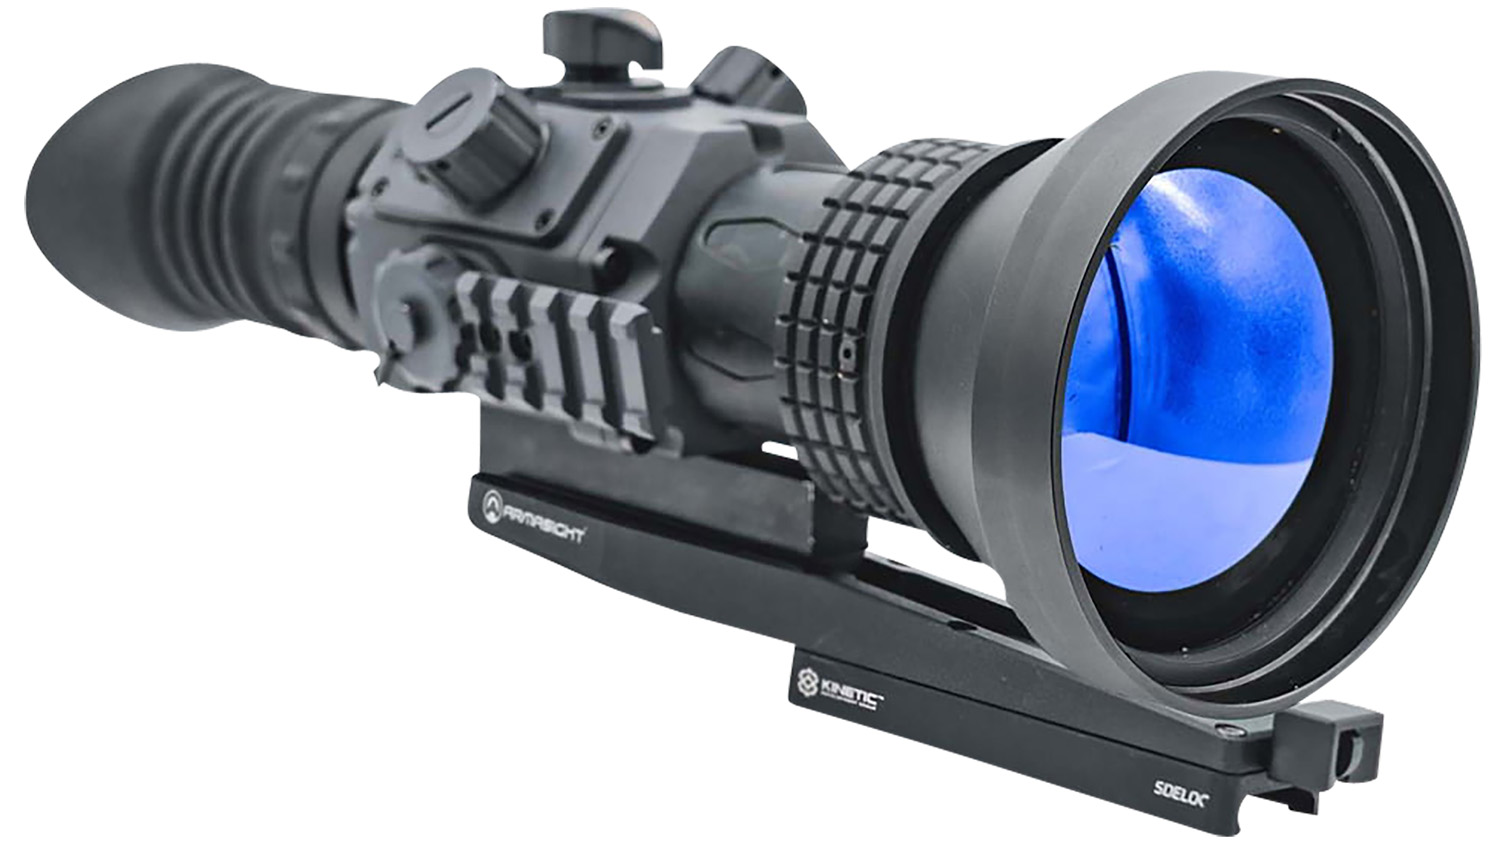 Armasight TAVT66WN7CONT102 Contractor 640 Thermal Rifle Scope Black Hardcoat Anodized 4.8-19.2x 75mm Multi Reticle 640x480, 60Hz Resolution Zoom 1x-4x